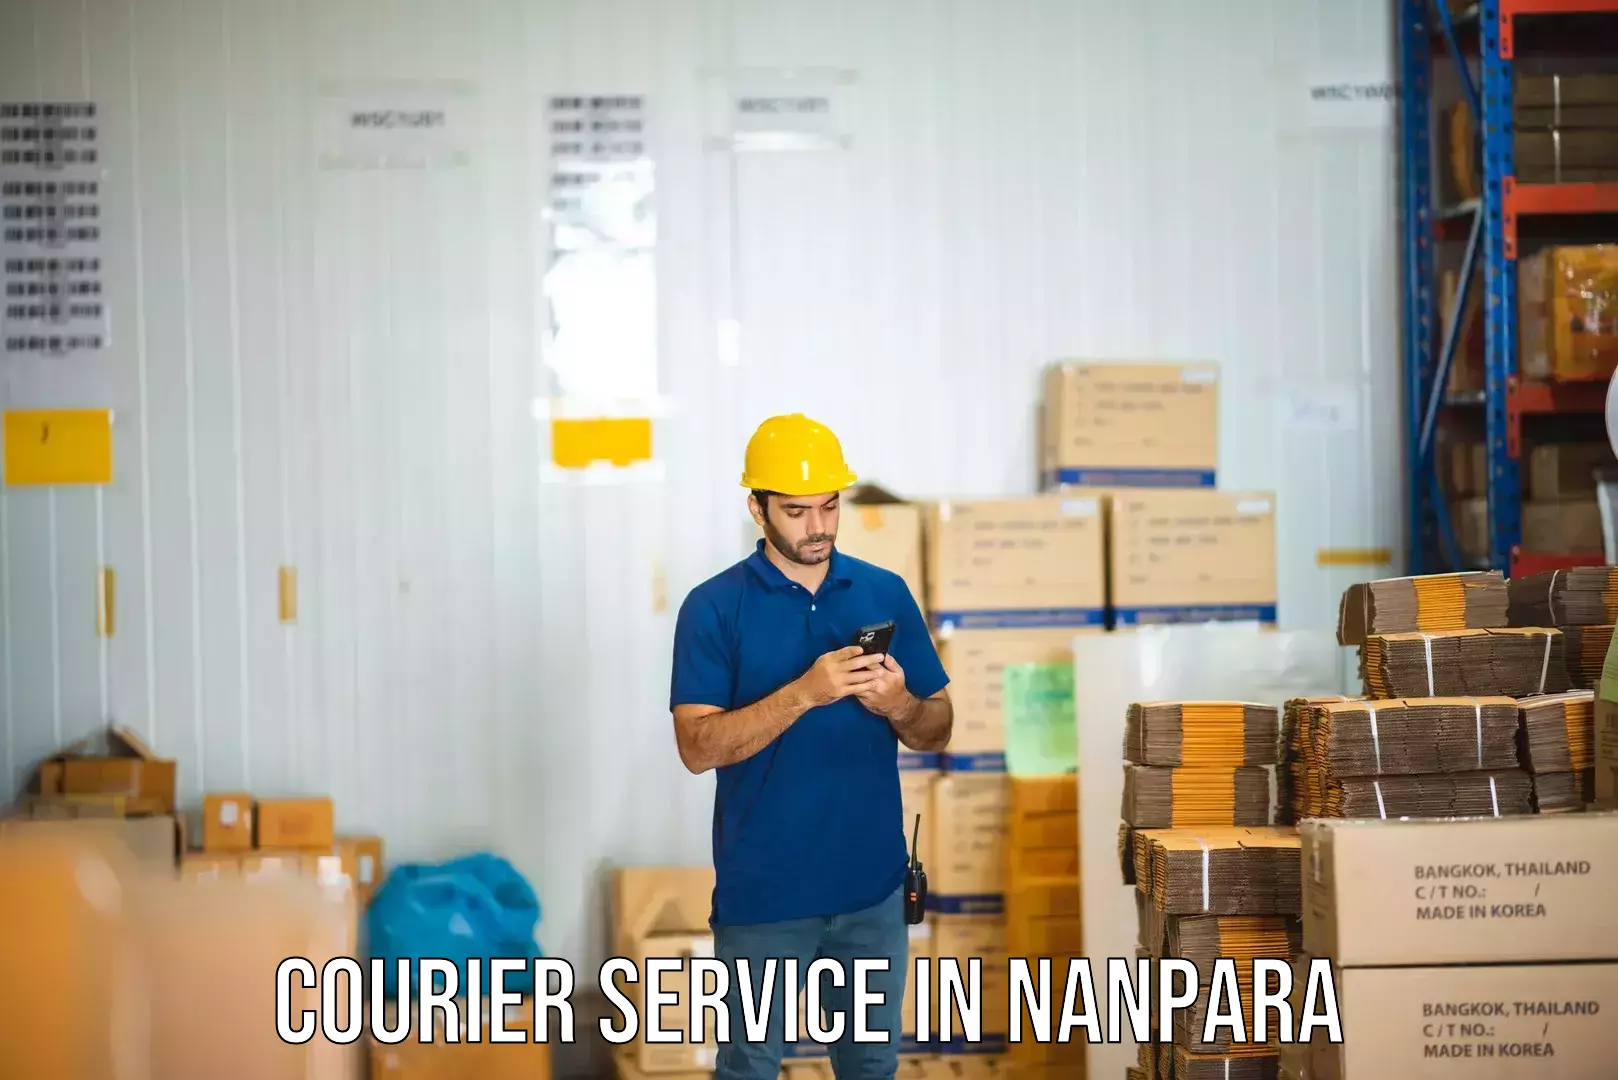 Sustainable delivery practices in Nanpara